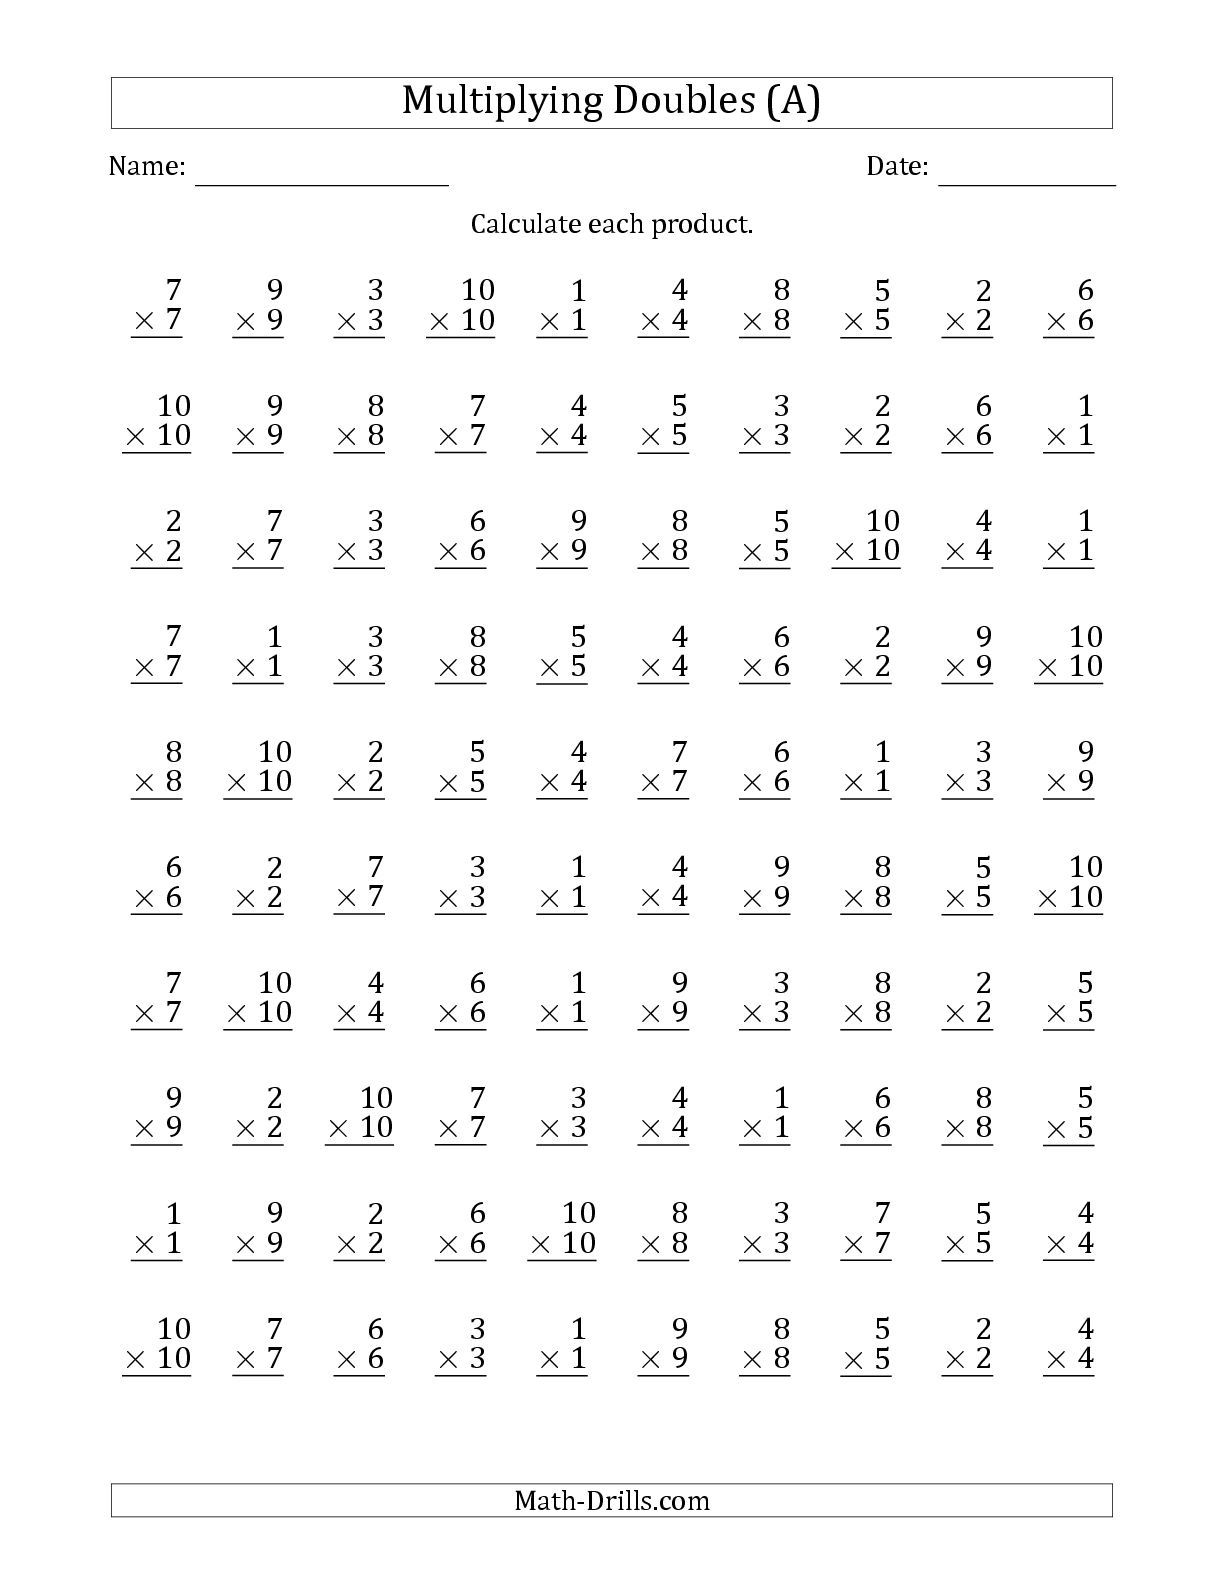 The Multiplying Doubles From 1 To 10 With 100 Questions Per pertaining to Printable Multiplication Practice Test